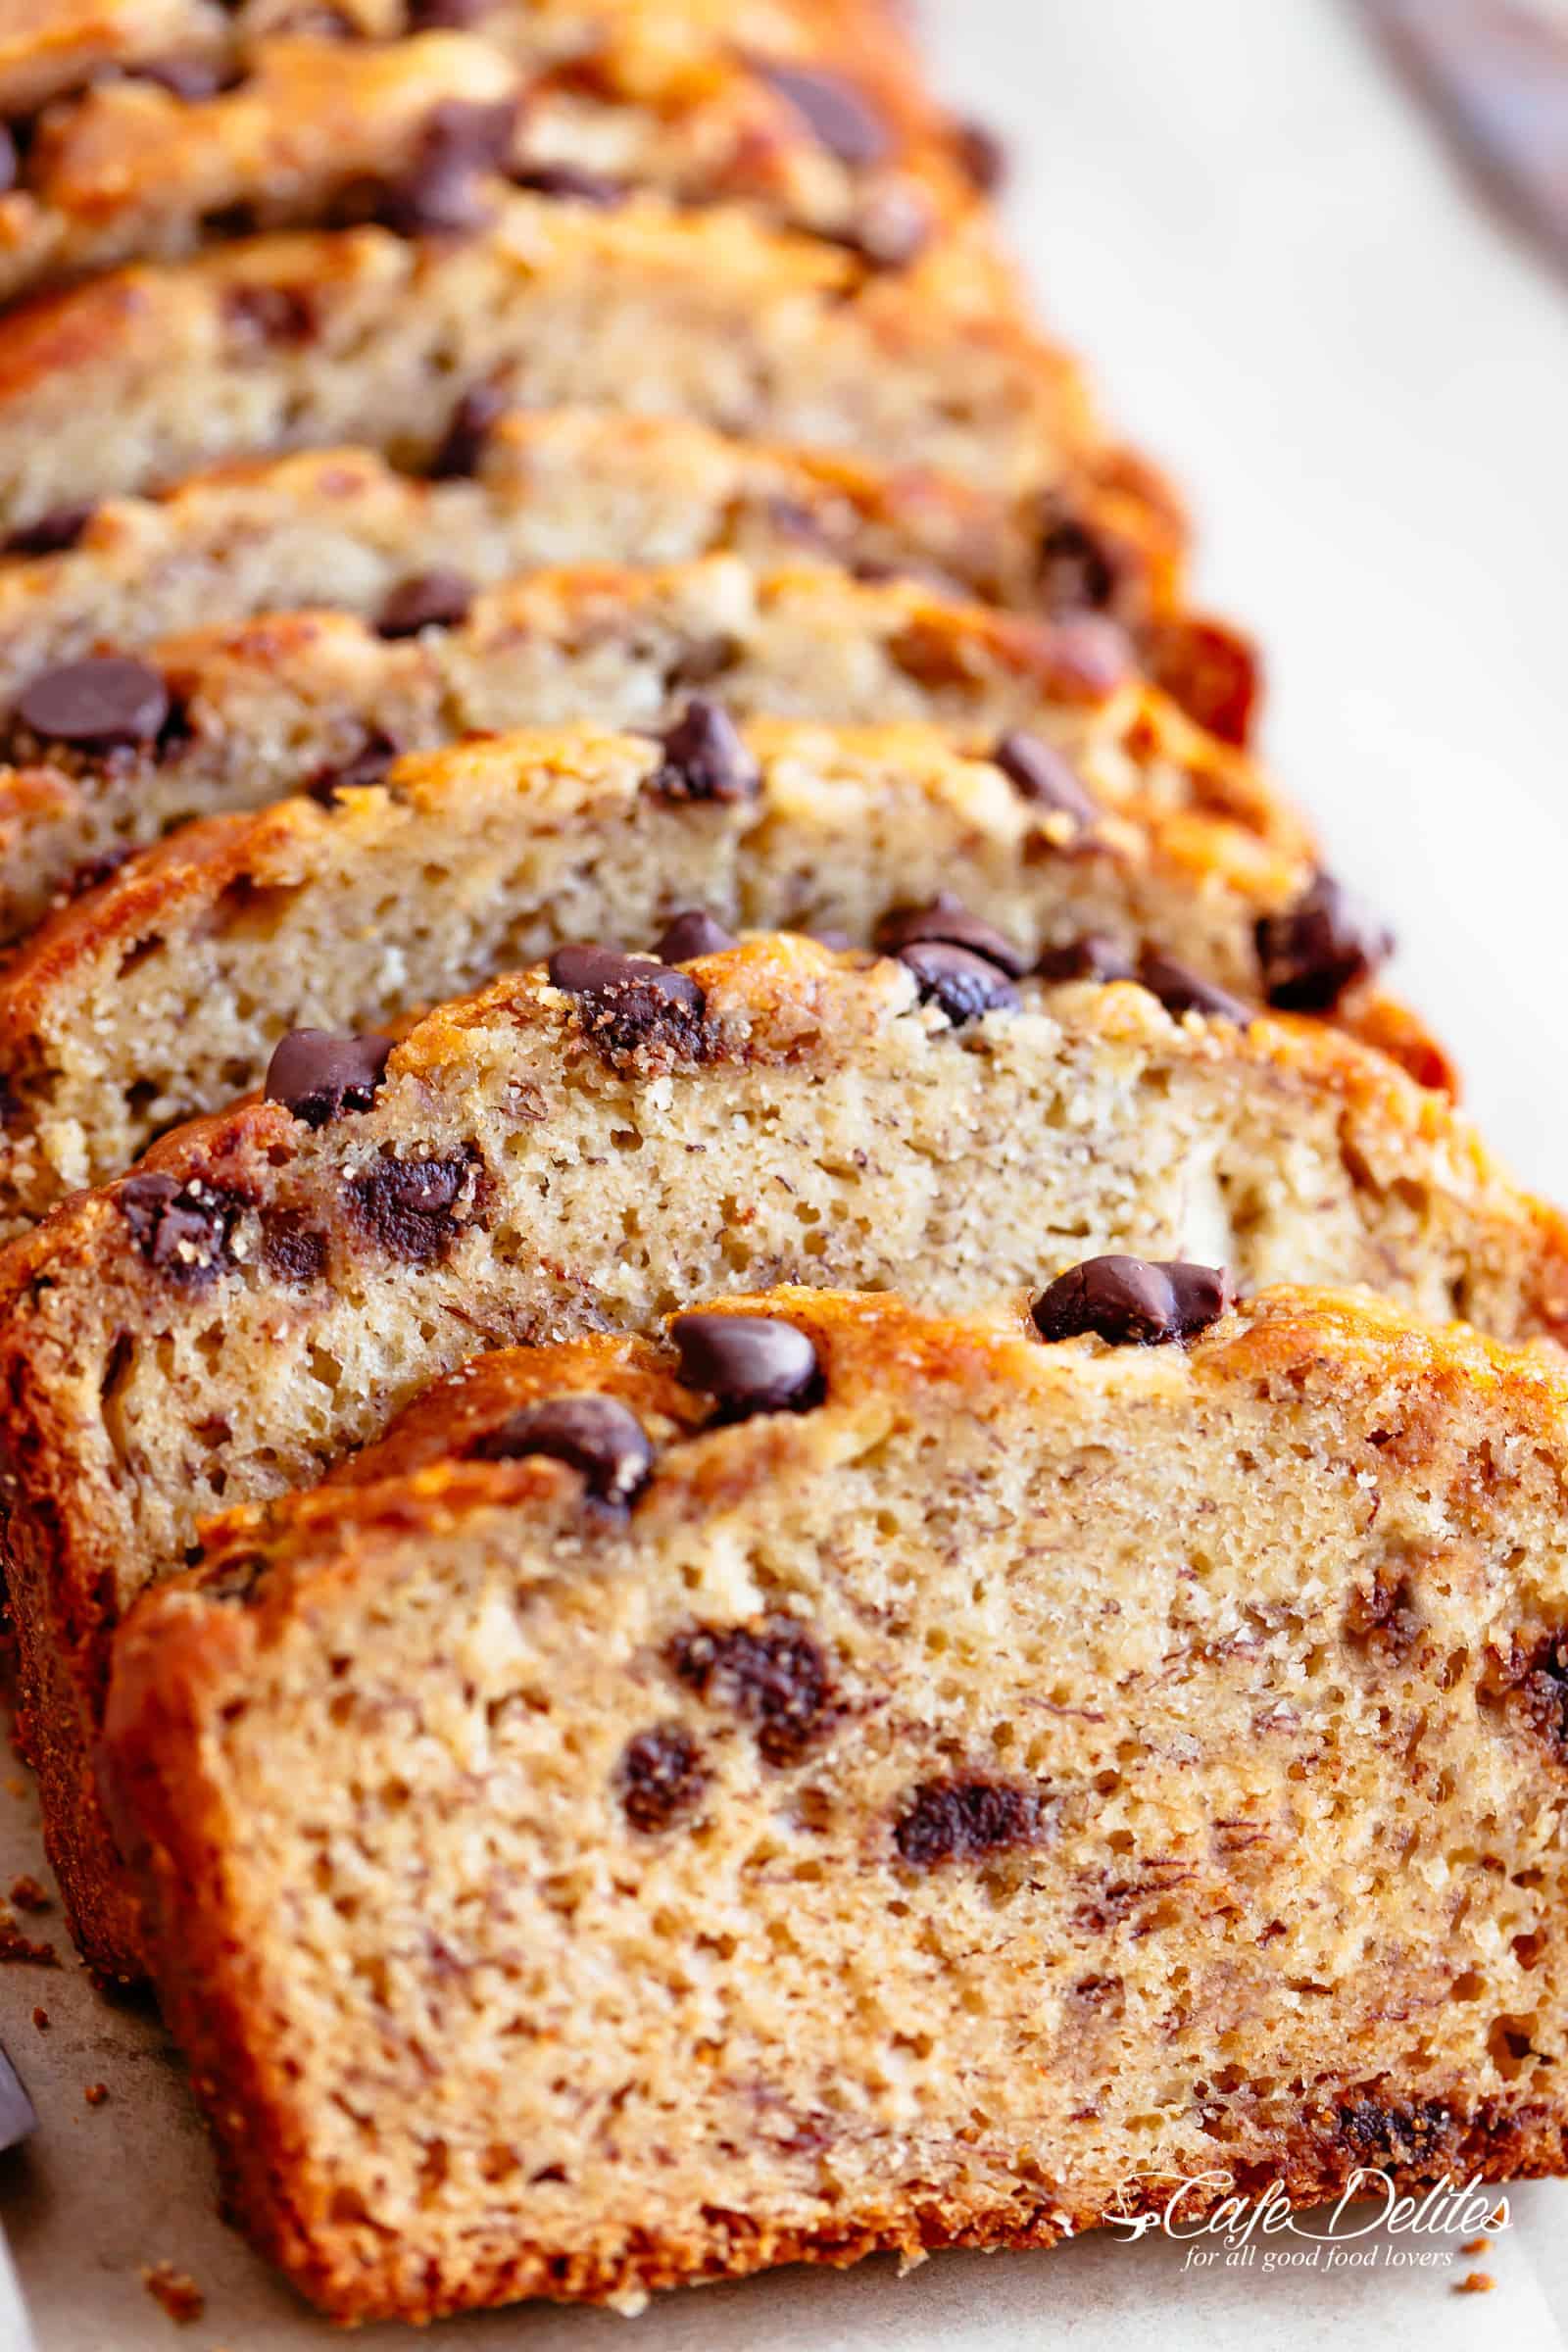 Best Banana Bread recipe with chocolate chips or nuts | cafedelites.com